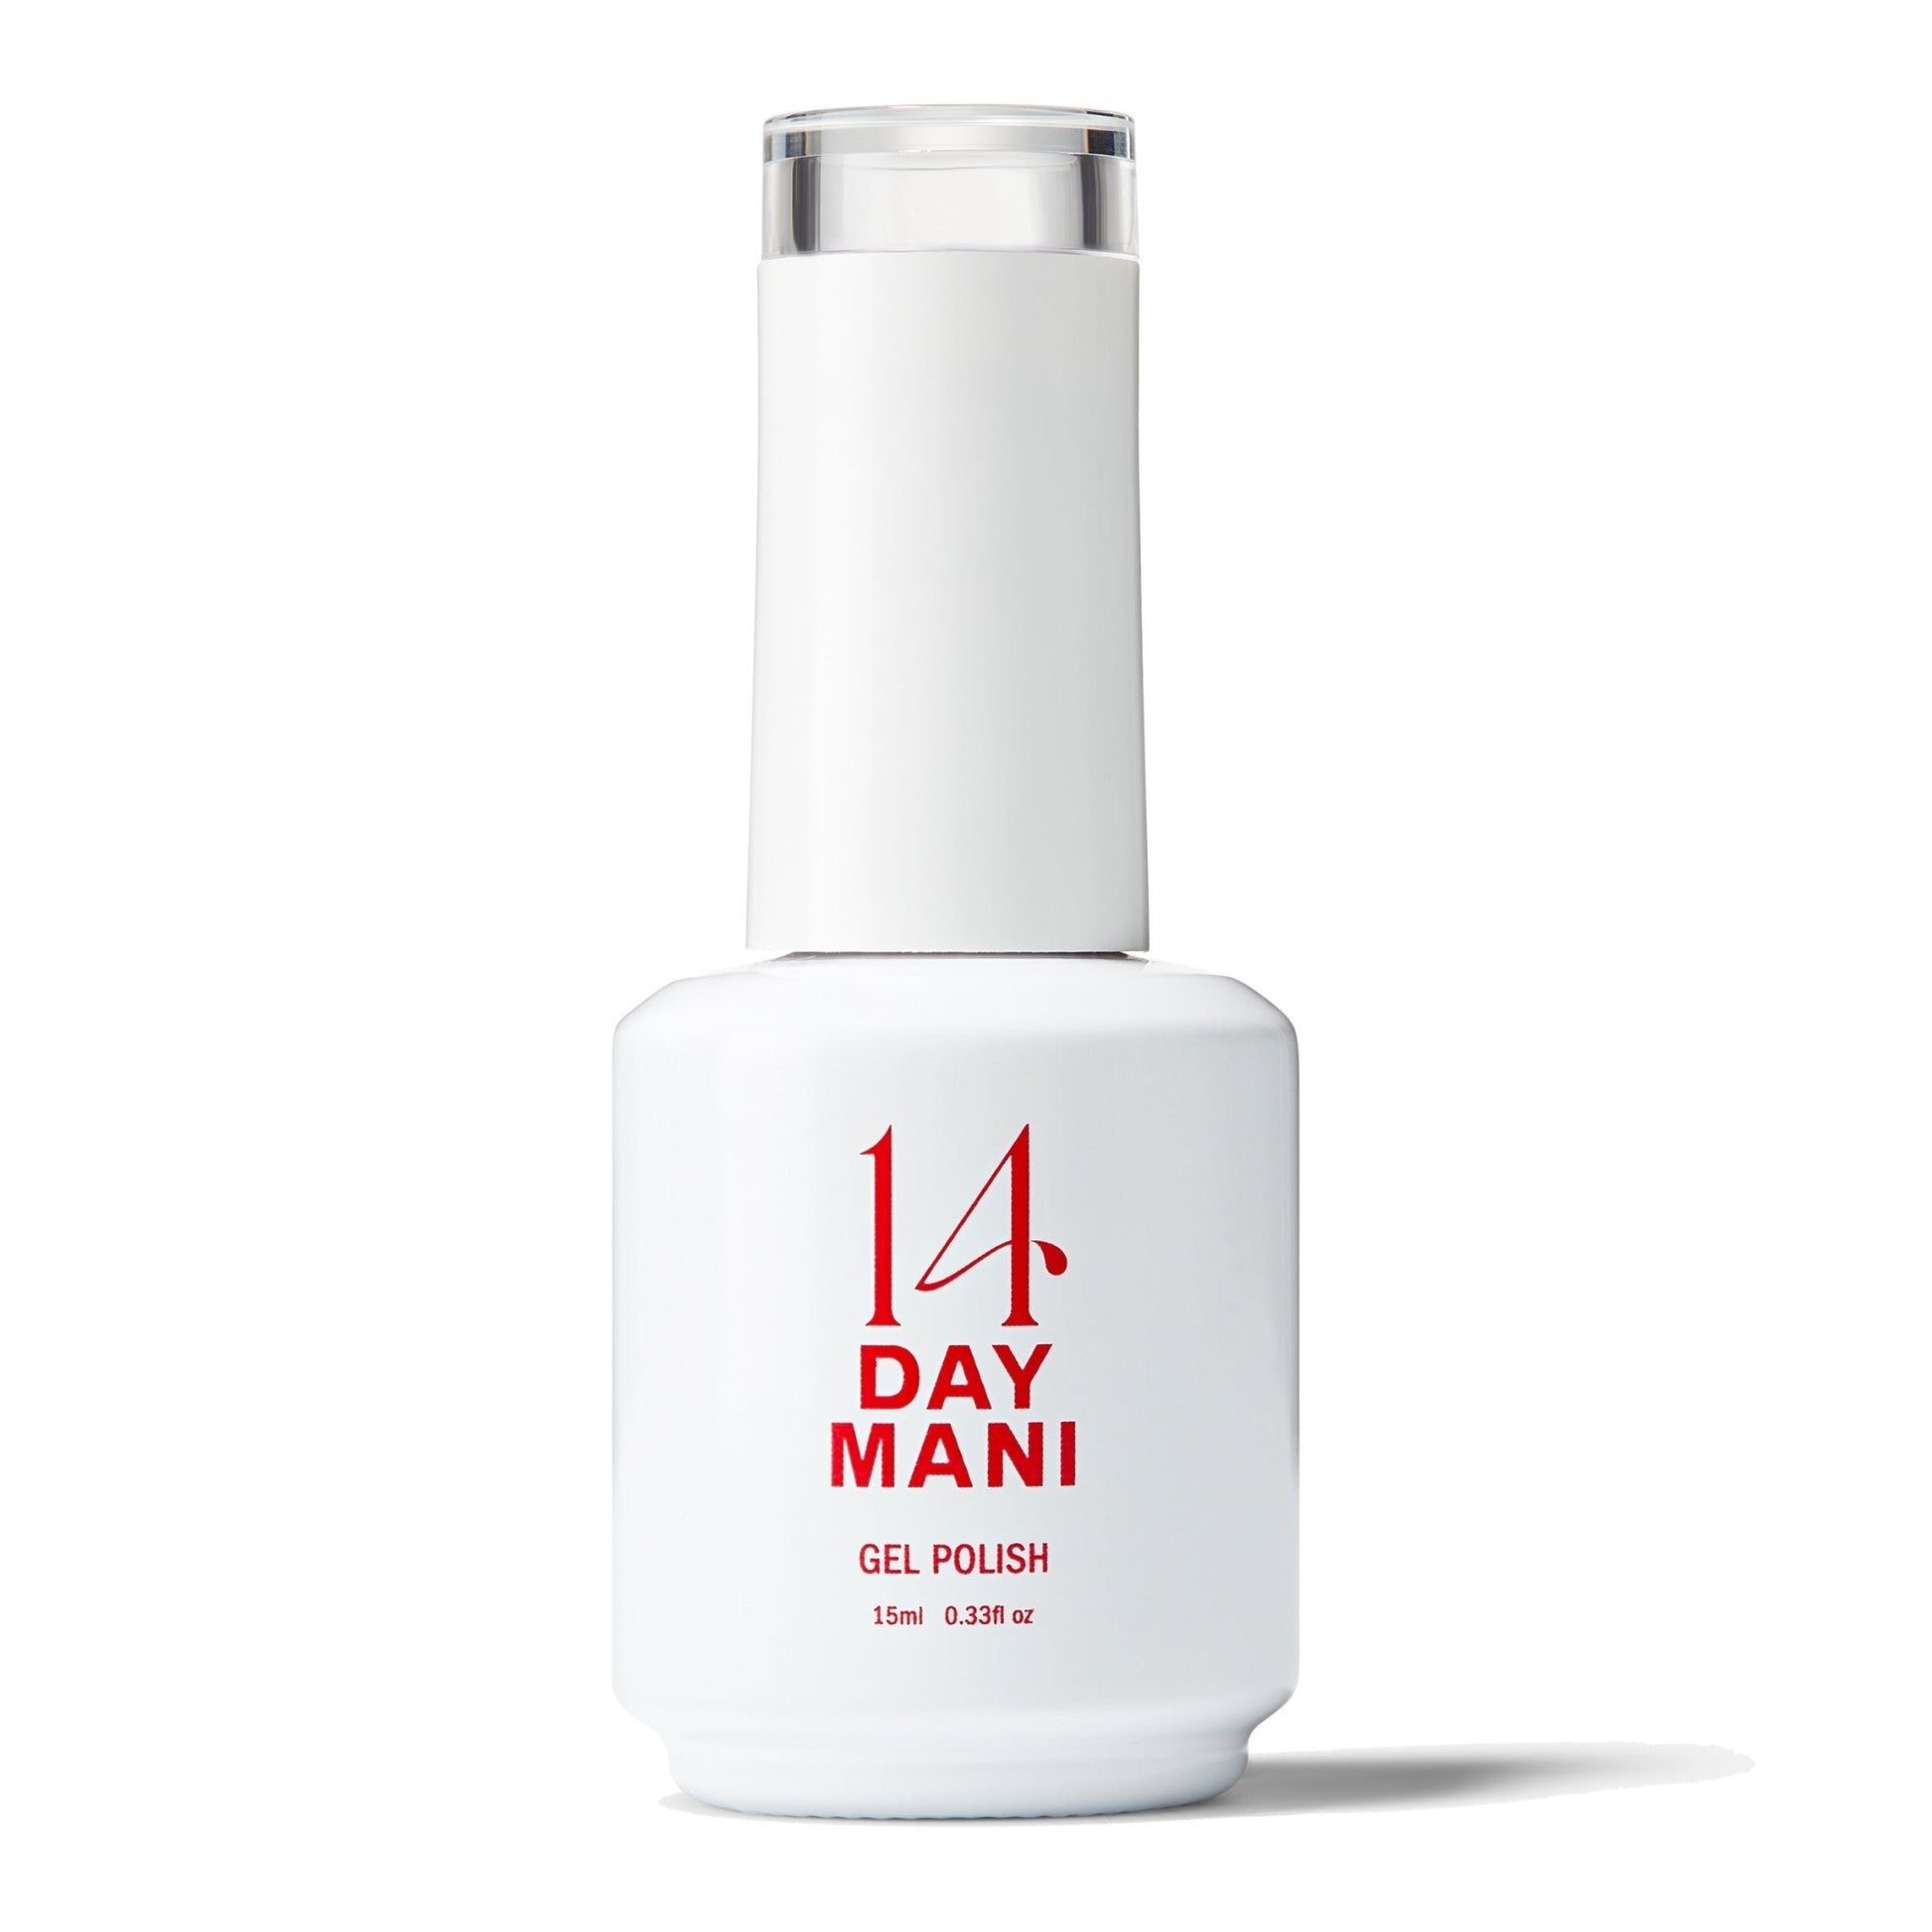 Love at First Sight - Gel Polish - 14 Day Manicure - Bottle 